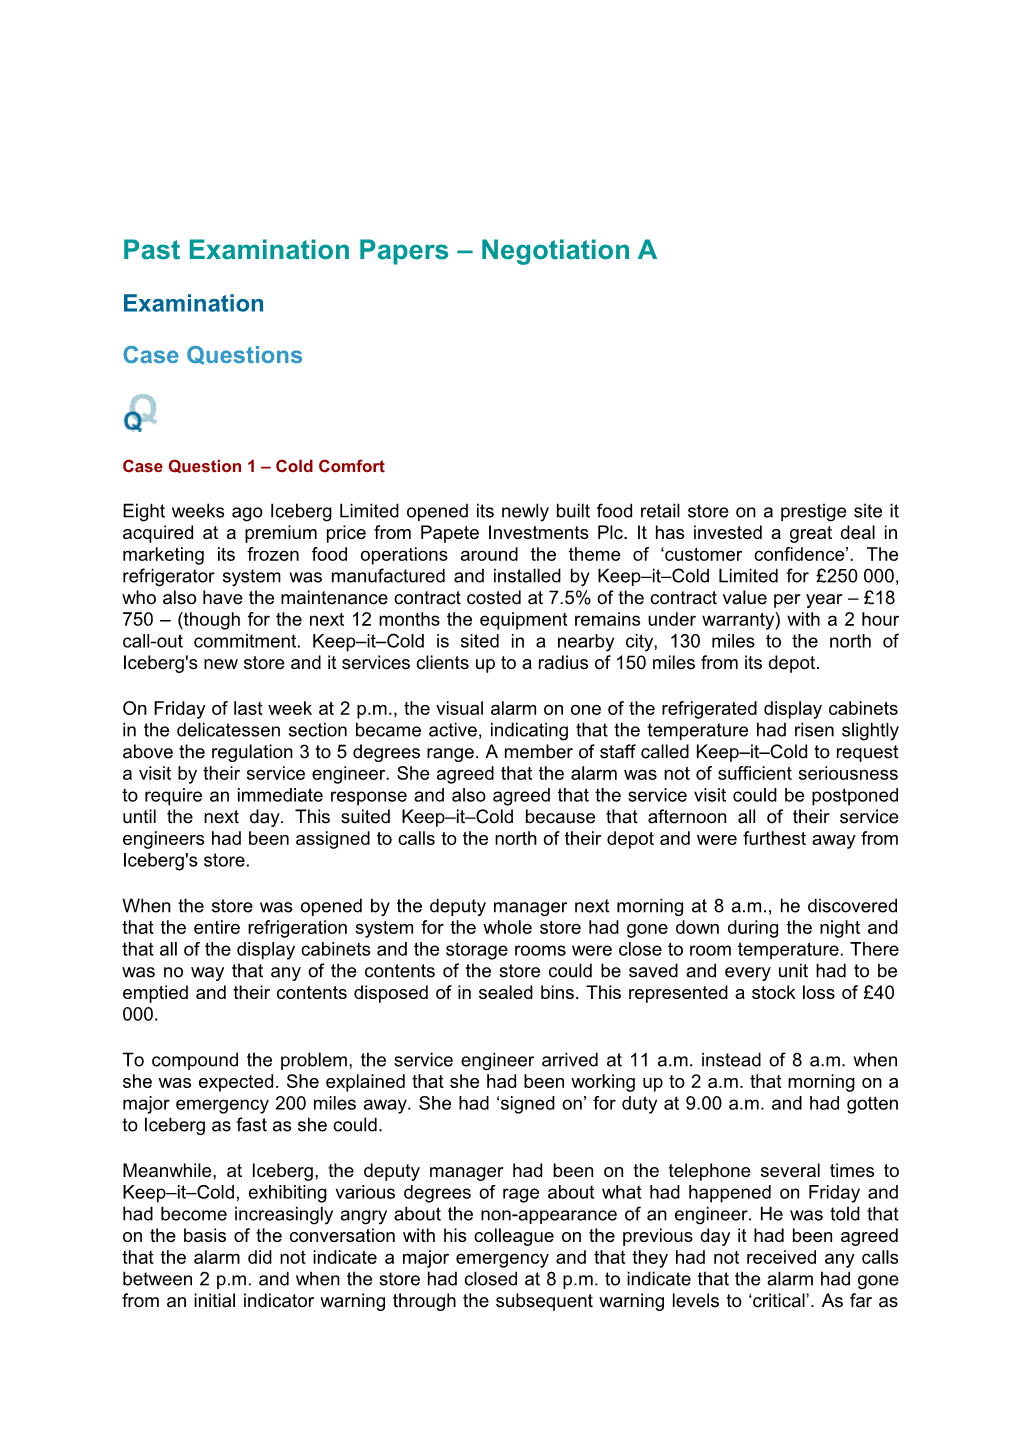 Past Examination Papers Negotiation A